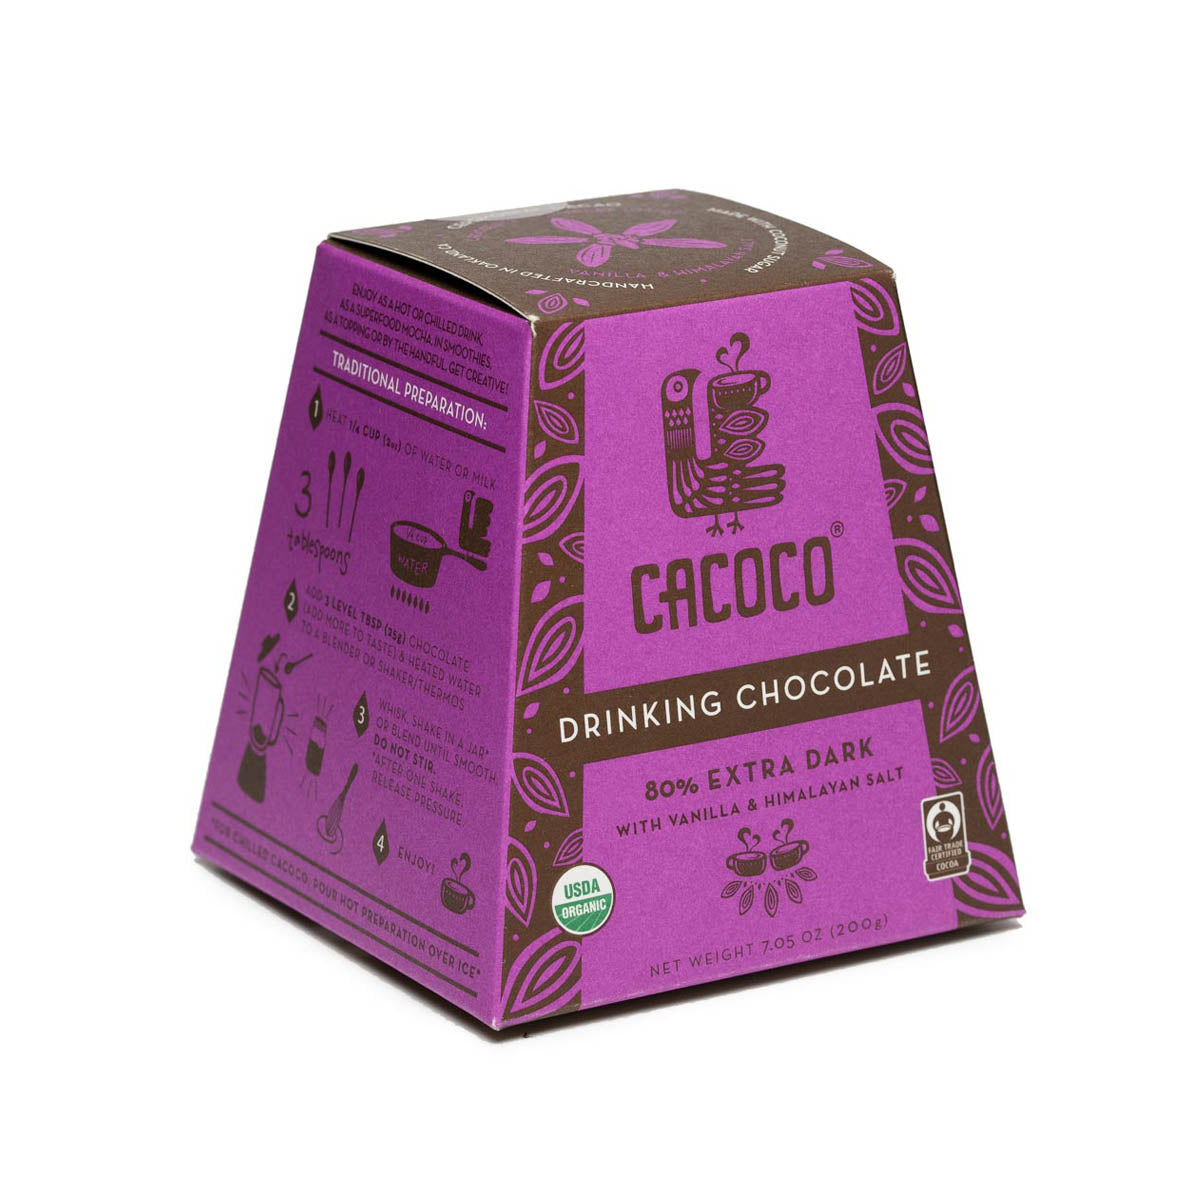 80% Extra Dark Drinking Chocolate | Coracao | Raw Living UK | Coracao 80% Extra Dark Drinking Chocolate is a Euphoric Dark Chocolate Blend highlighting the superfood benefits of Heirloom Cacao and Whole Vanilla Bean.